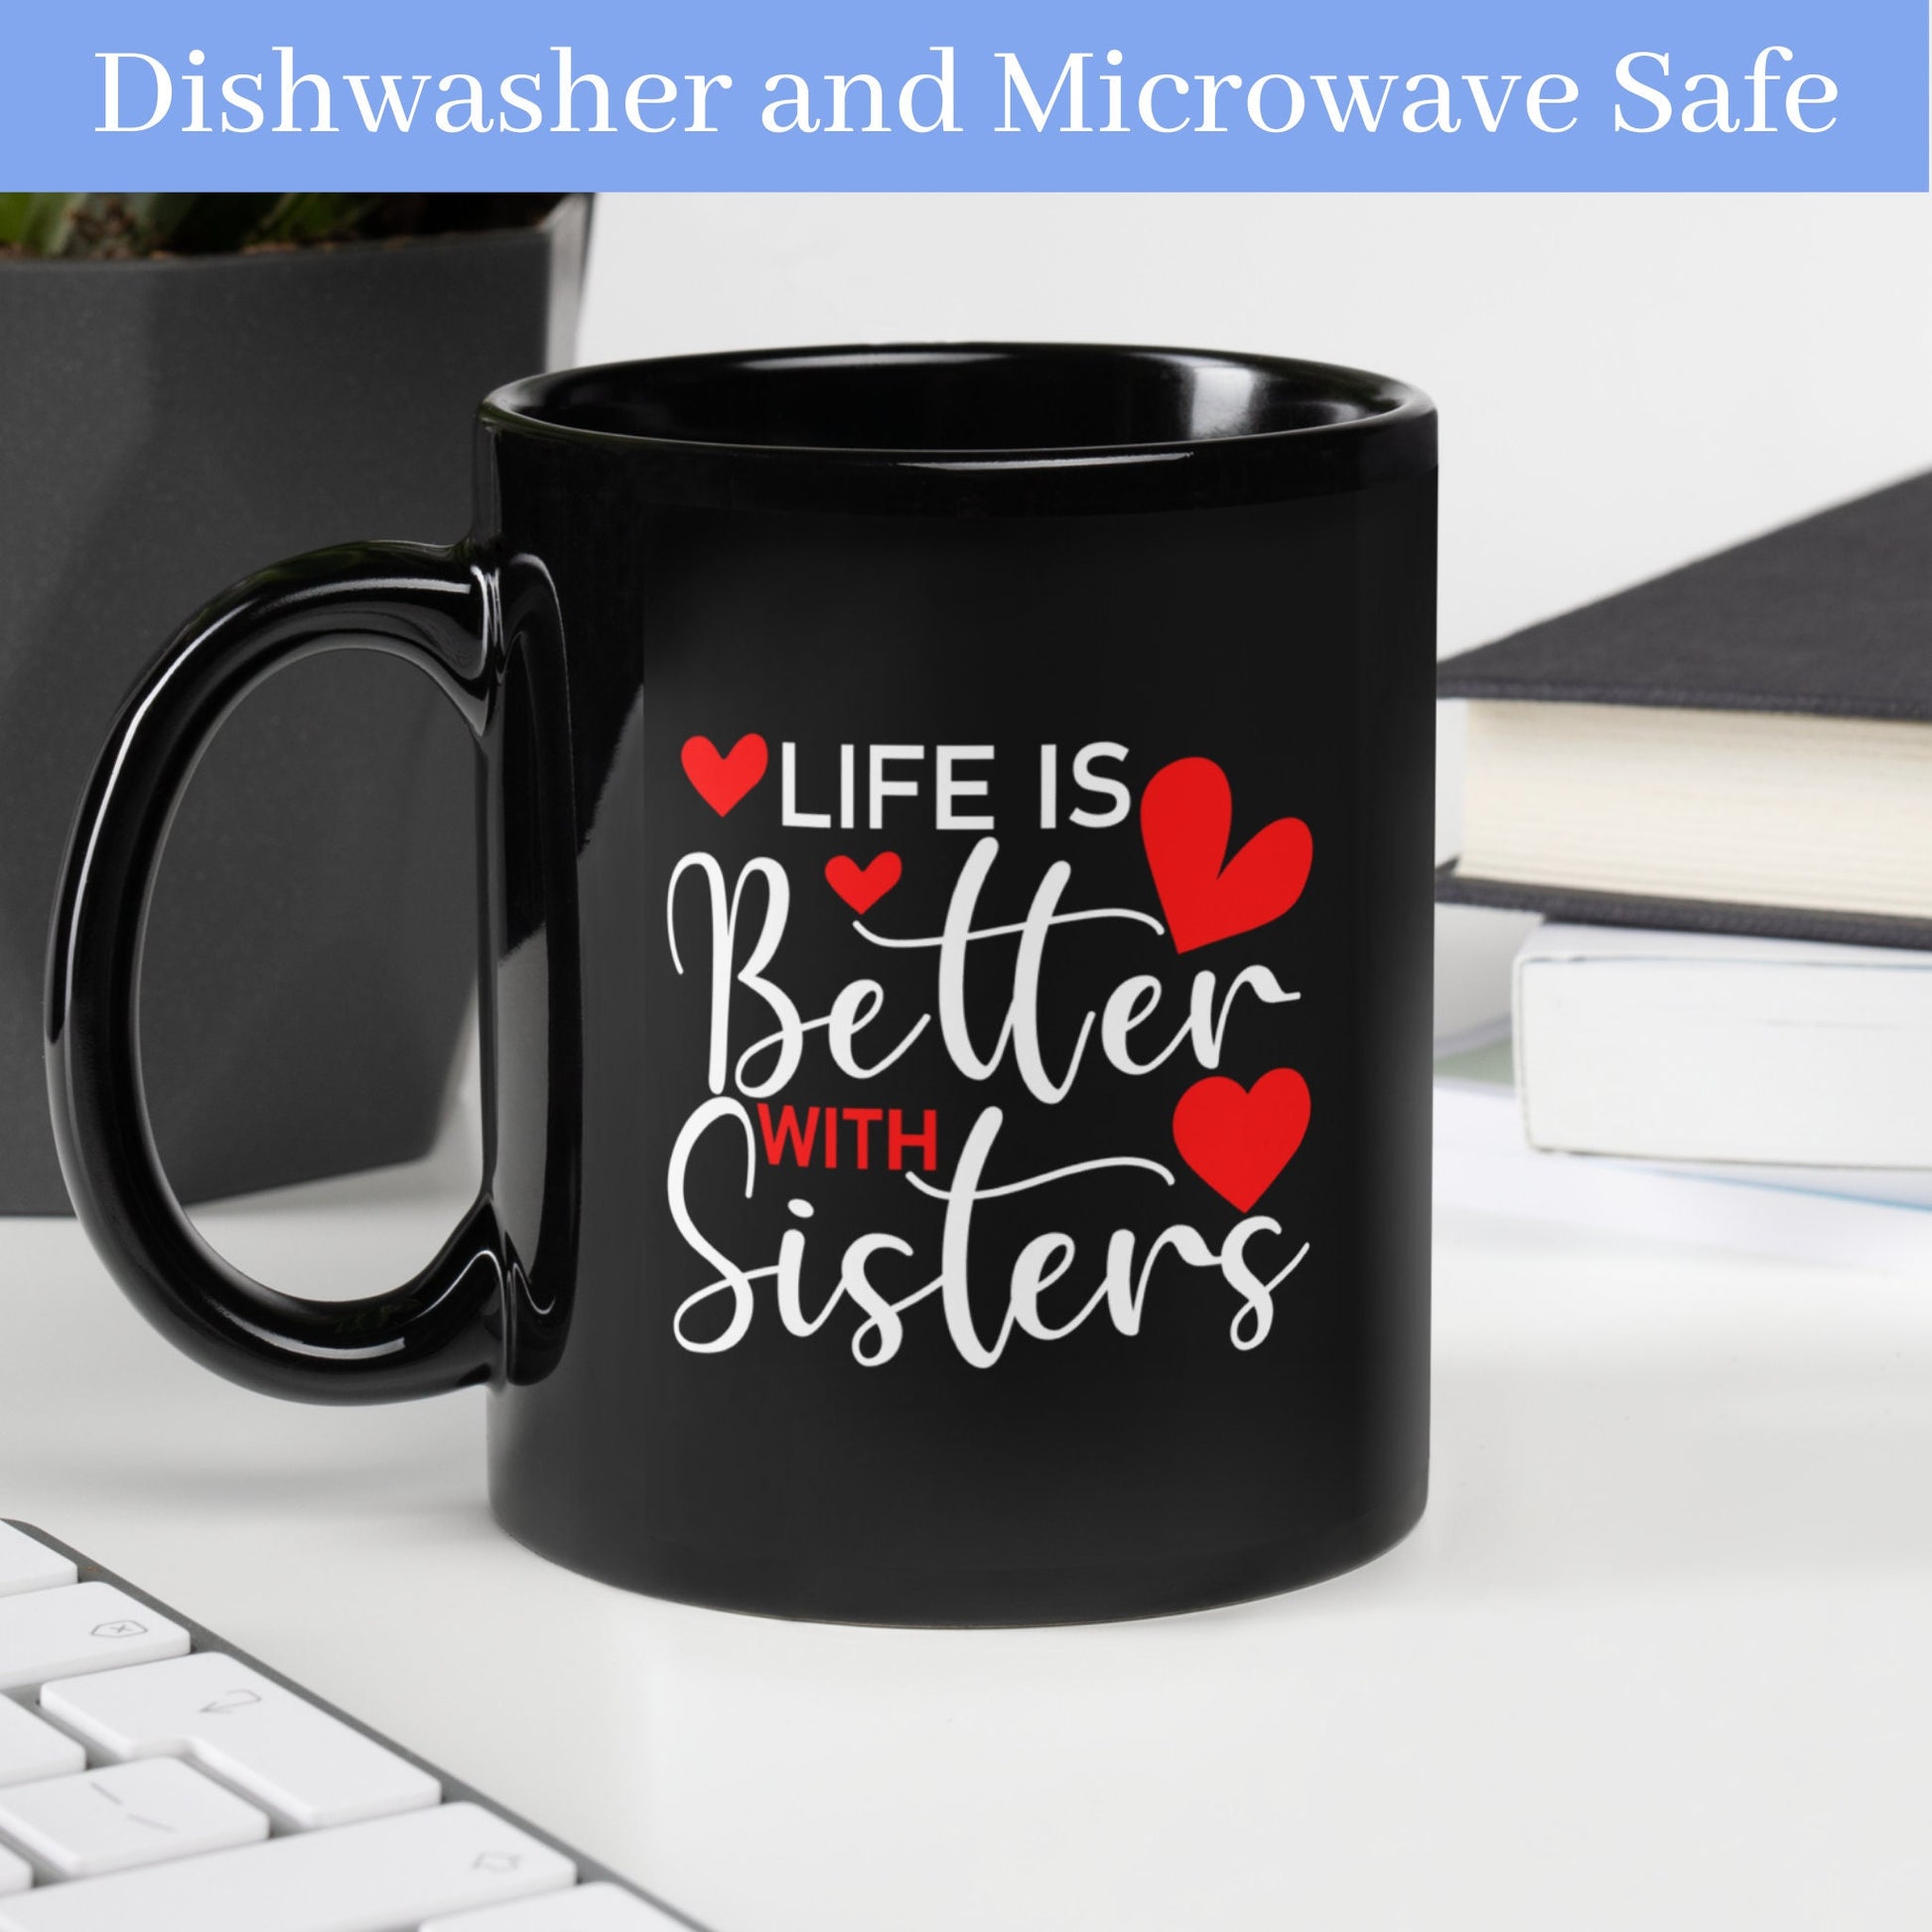 Best Sister Ever Mug, Life is Better with Sisters Mug - Zehnaria - FAMILY & FRIENDS - Mugs